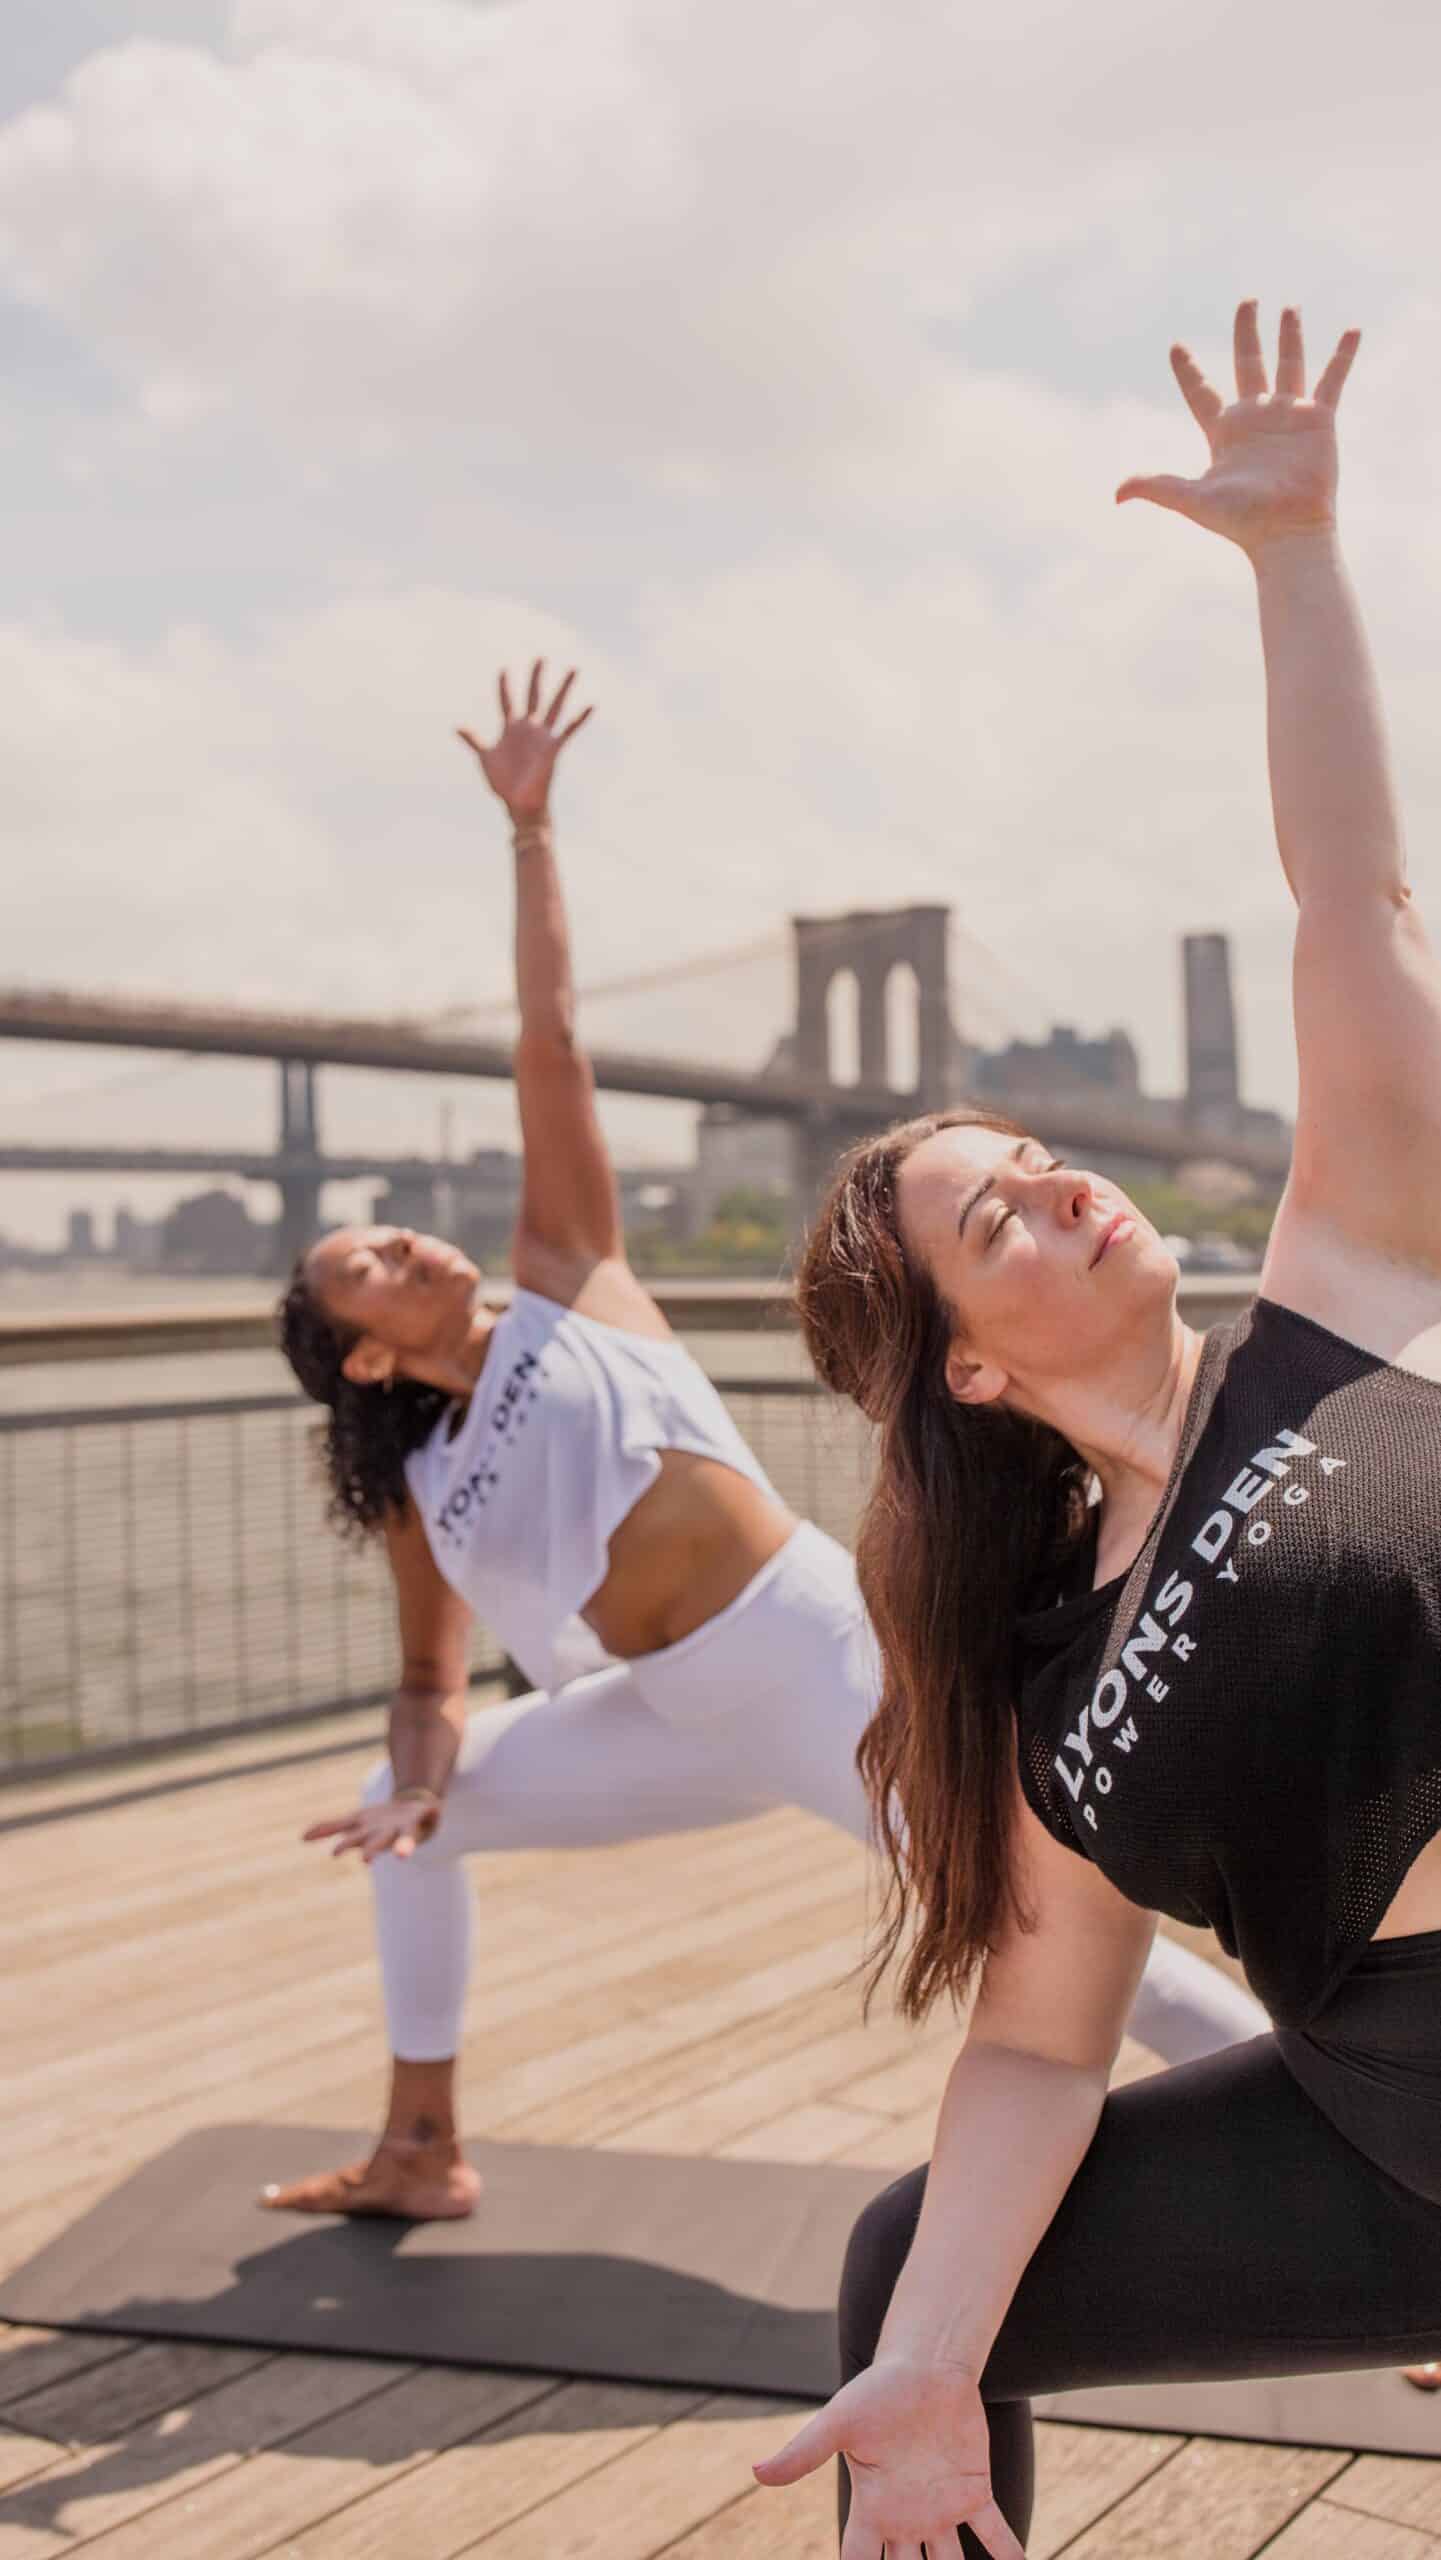 Add to calendar. 
Riverfront workouts. 
Not just for locals. 
September RSVPS ➤ now open.

Tuesdays w/ @hiitthedecknyc
Seaport Square
Saturdays w/ @lyonsdenpy
Heineken Riverdeck

More fit fun ↴
August Plus-Up w/ @obe_fitness
🗓️Thursday, 8/31
 6:30 - 7:30pm
The Rooftop at Pier 17
is presented by @nyphospital